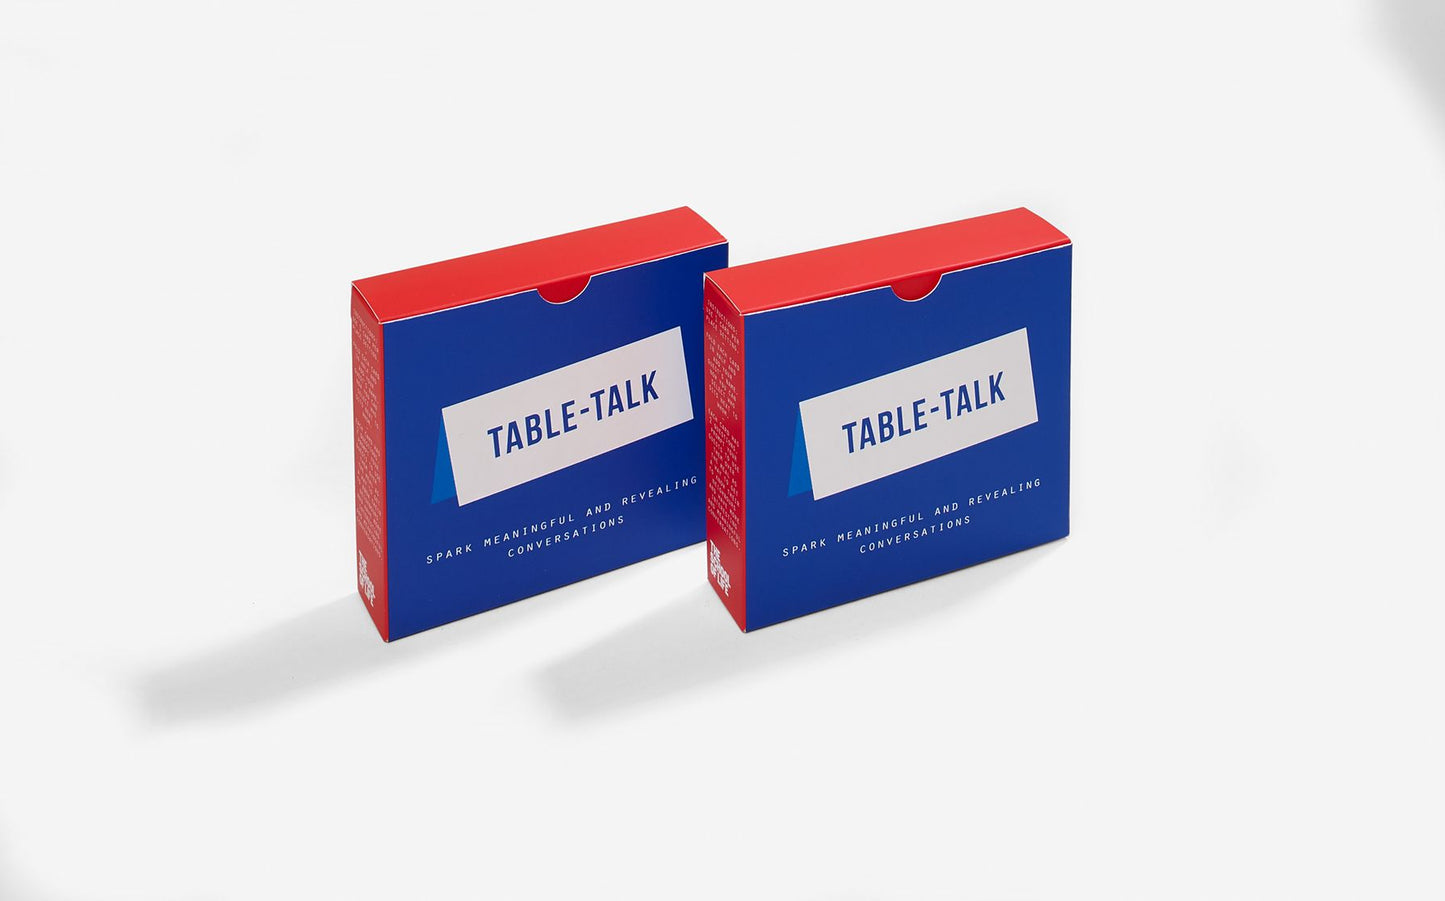 Table Talk: Spark Meaningful and Revealing Conversations